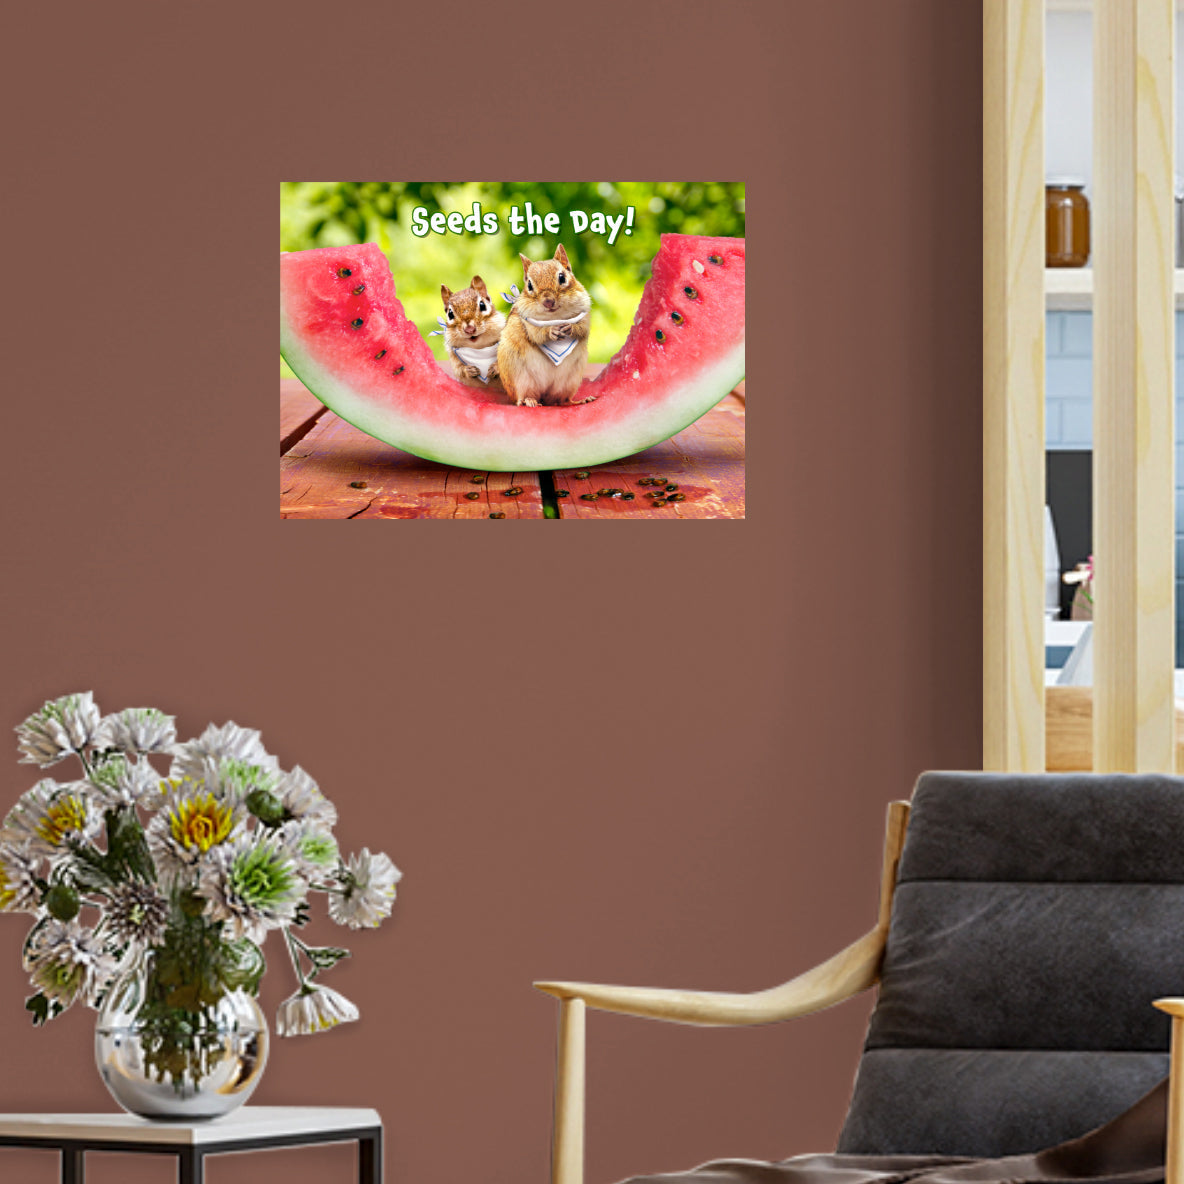 Avanti Press: One In A Melon Mural - Removable Adhesive Decal